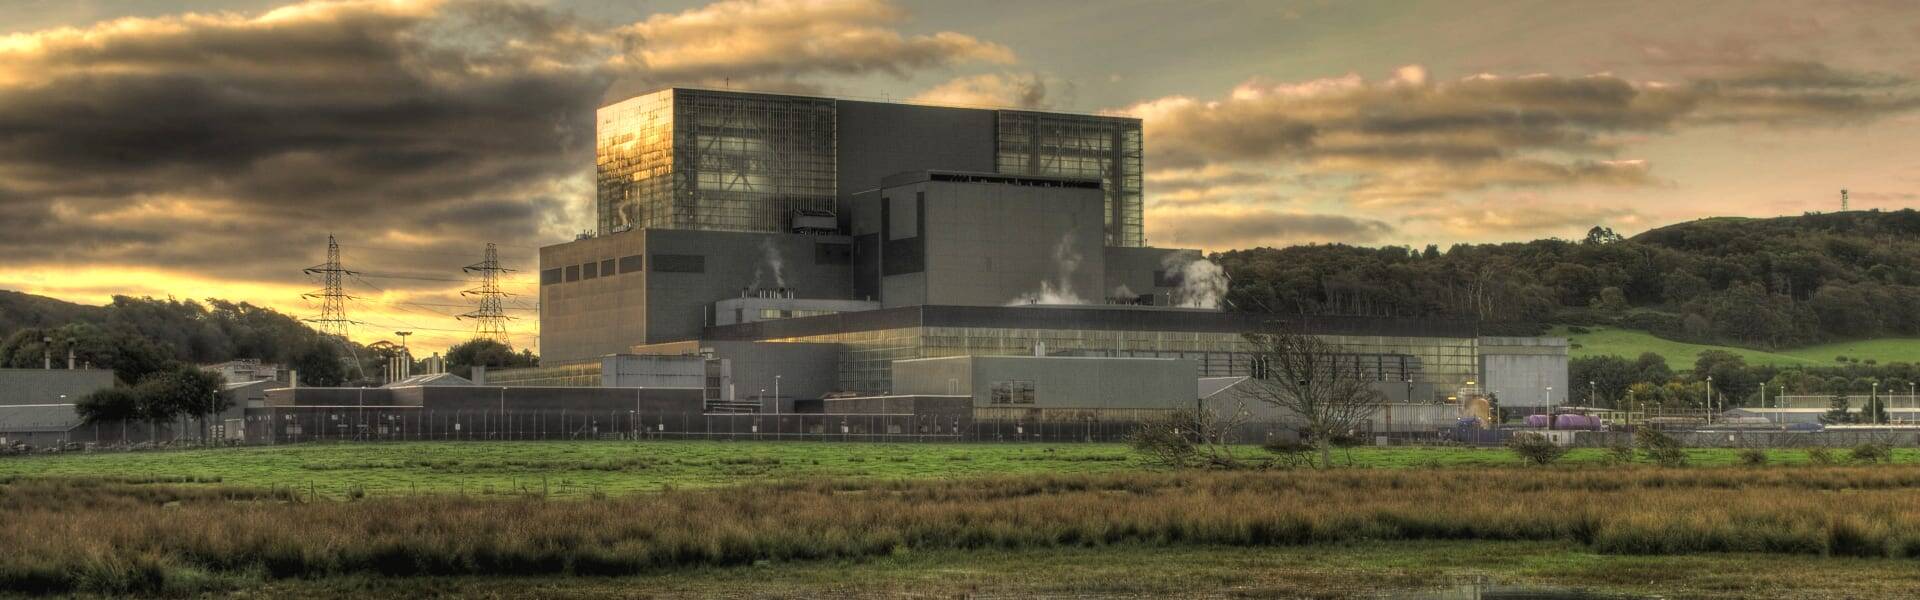 ESC backs new nuclear but says costs must fall